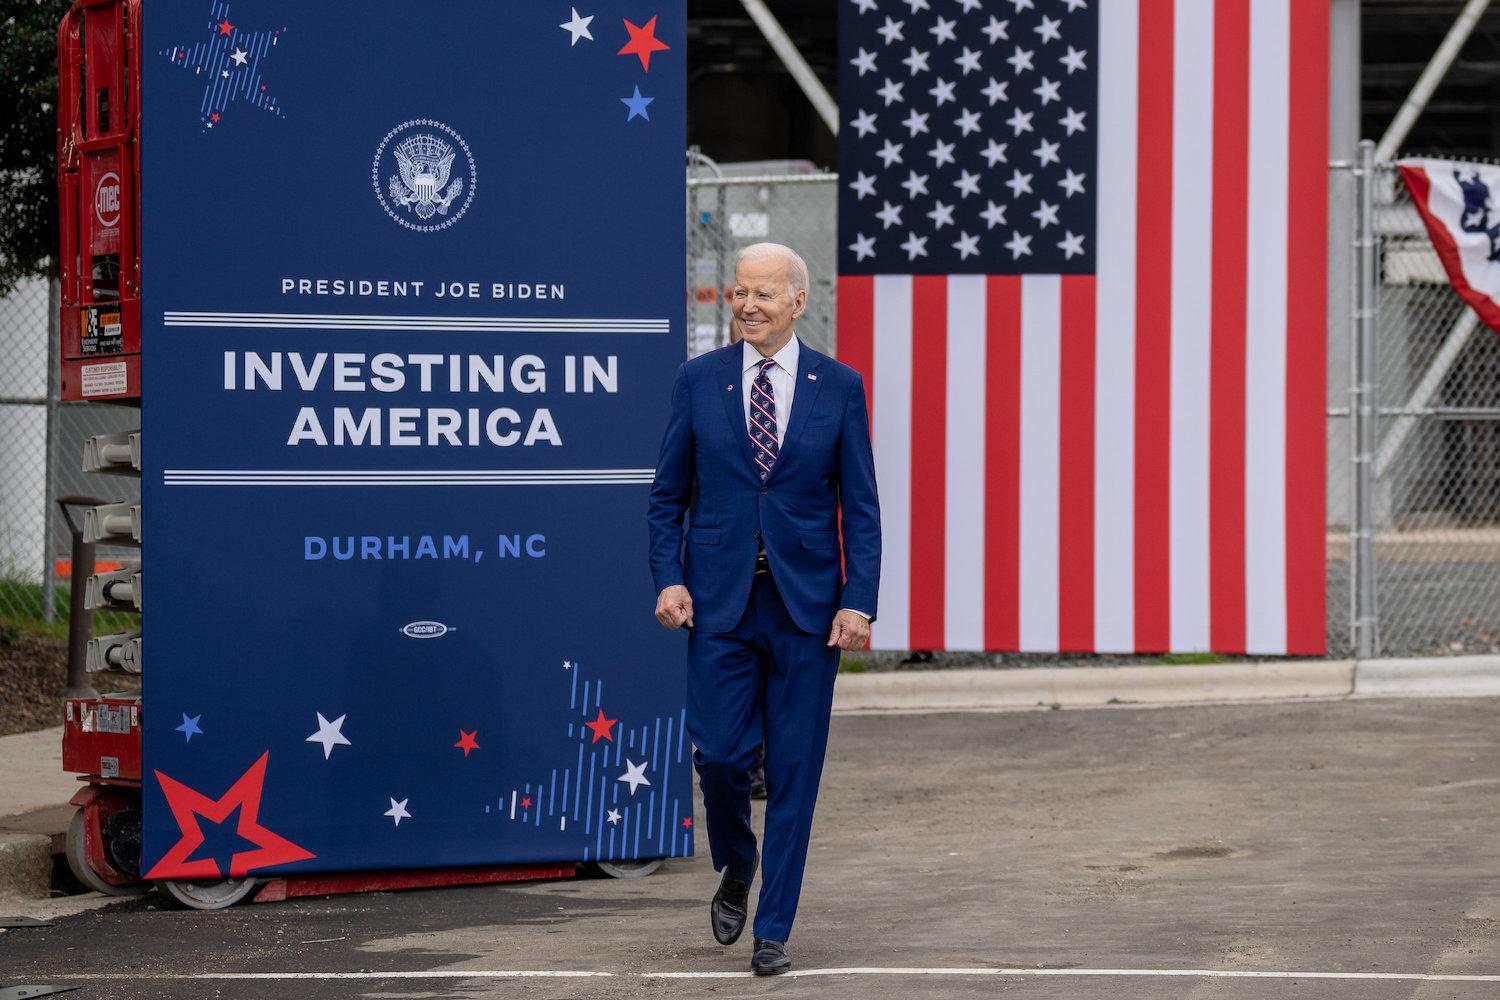 Joe Biden stops at North Carolina semiconductor factory as part of Investing in America tour to promote U.S. manufacturing